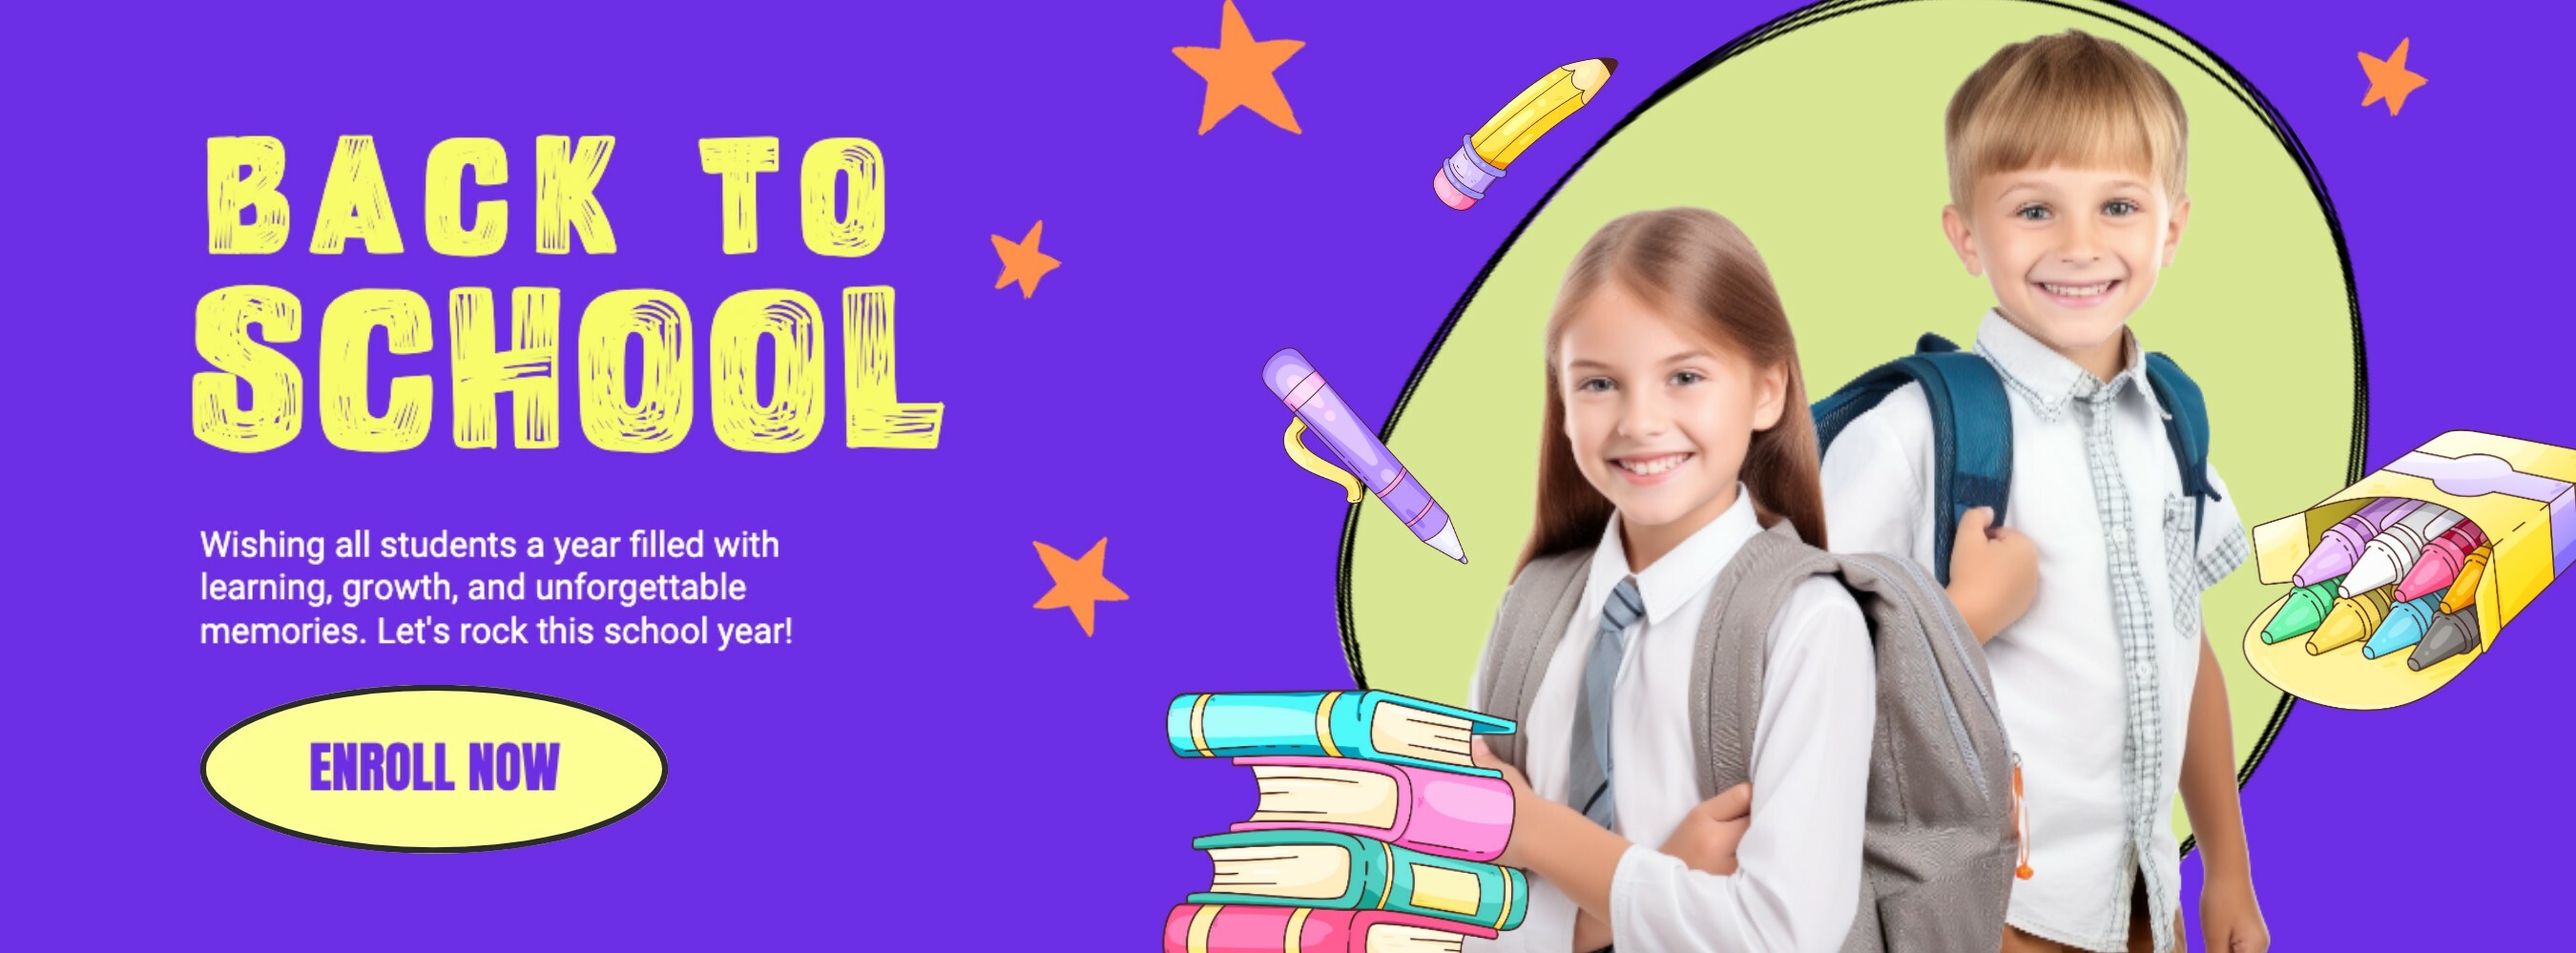 Colorful Back To School Facebook Cover